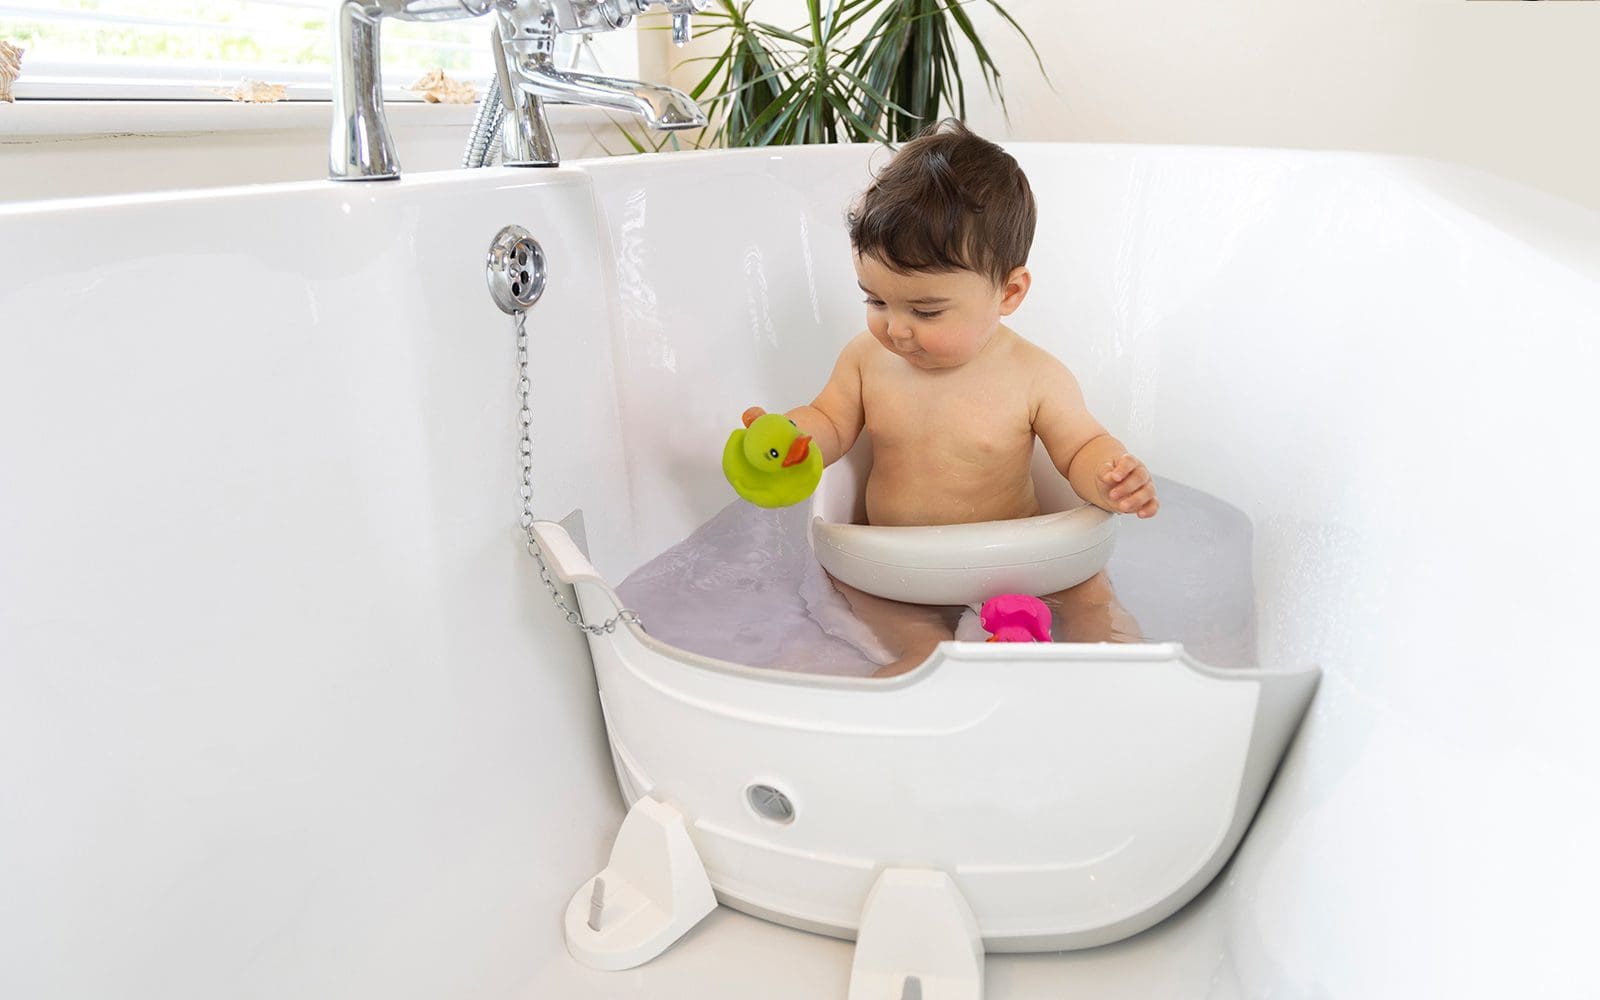 Baby BathTime products - featuring the BabyDam bathwater barrier and Orbital bath seat